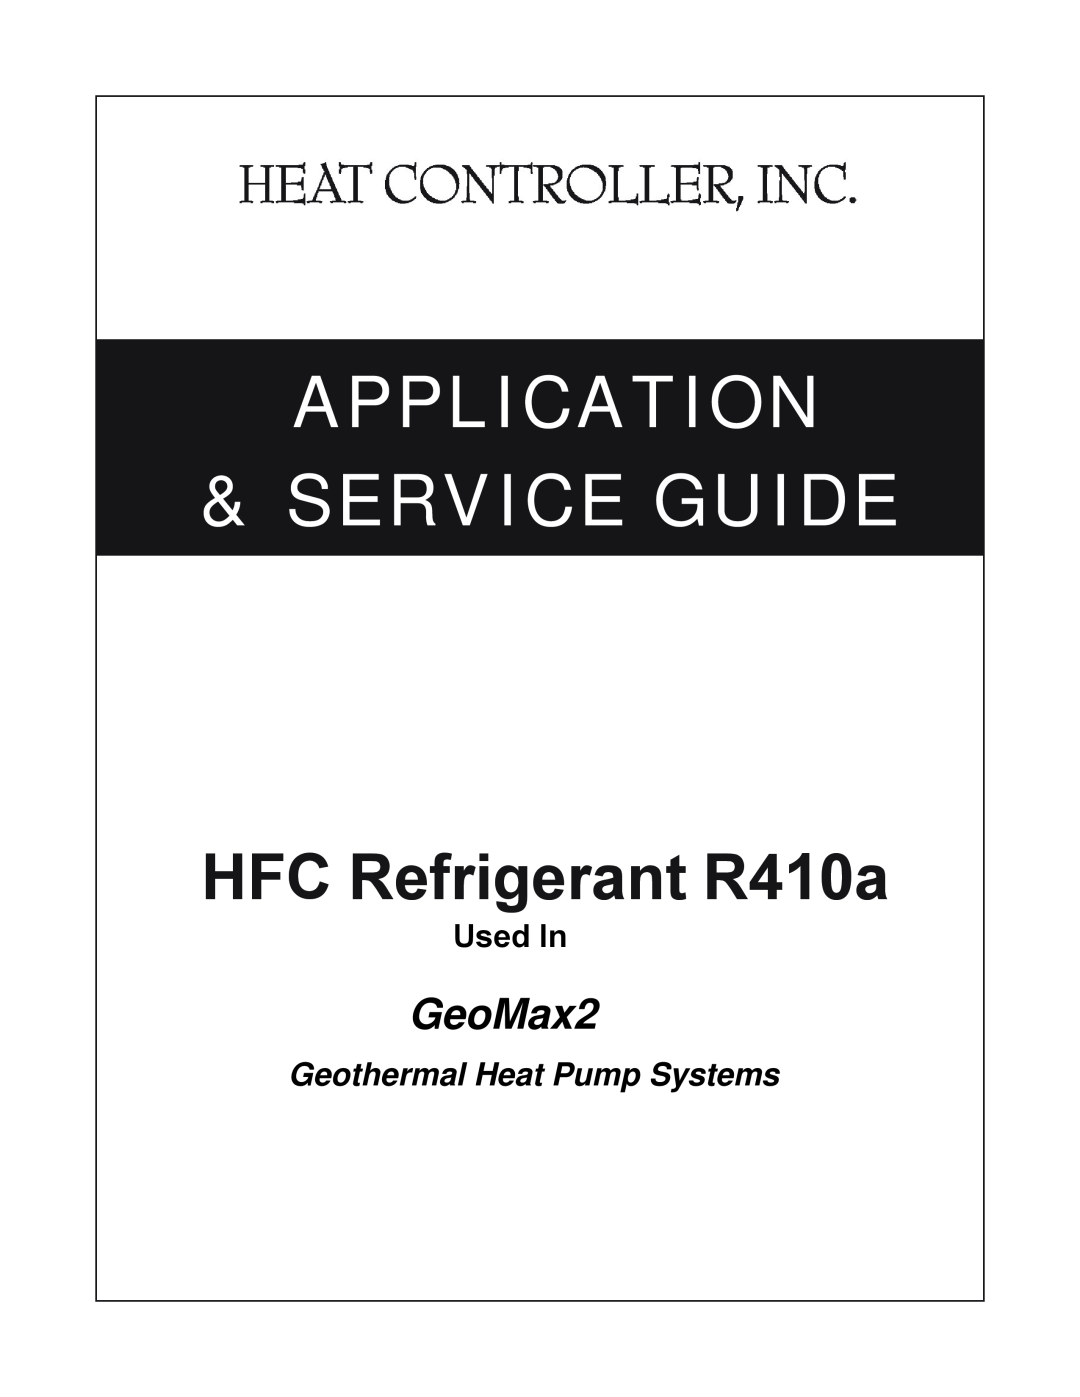 Heat Controller R410A manual Application & Service Guide, HFC Refrigerant R410a, GeoMax2, Used In 